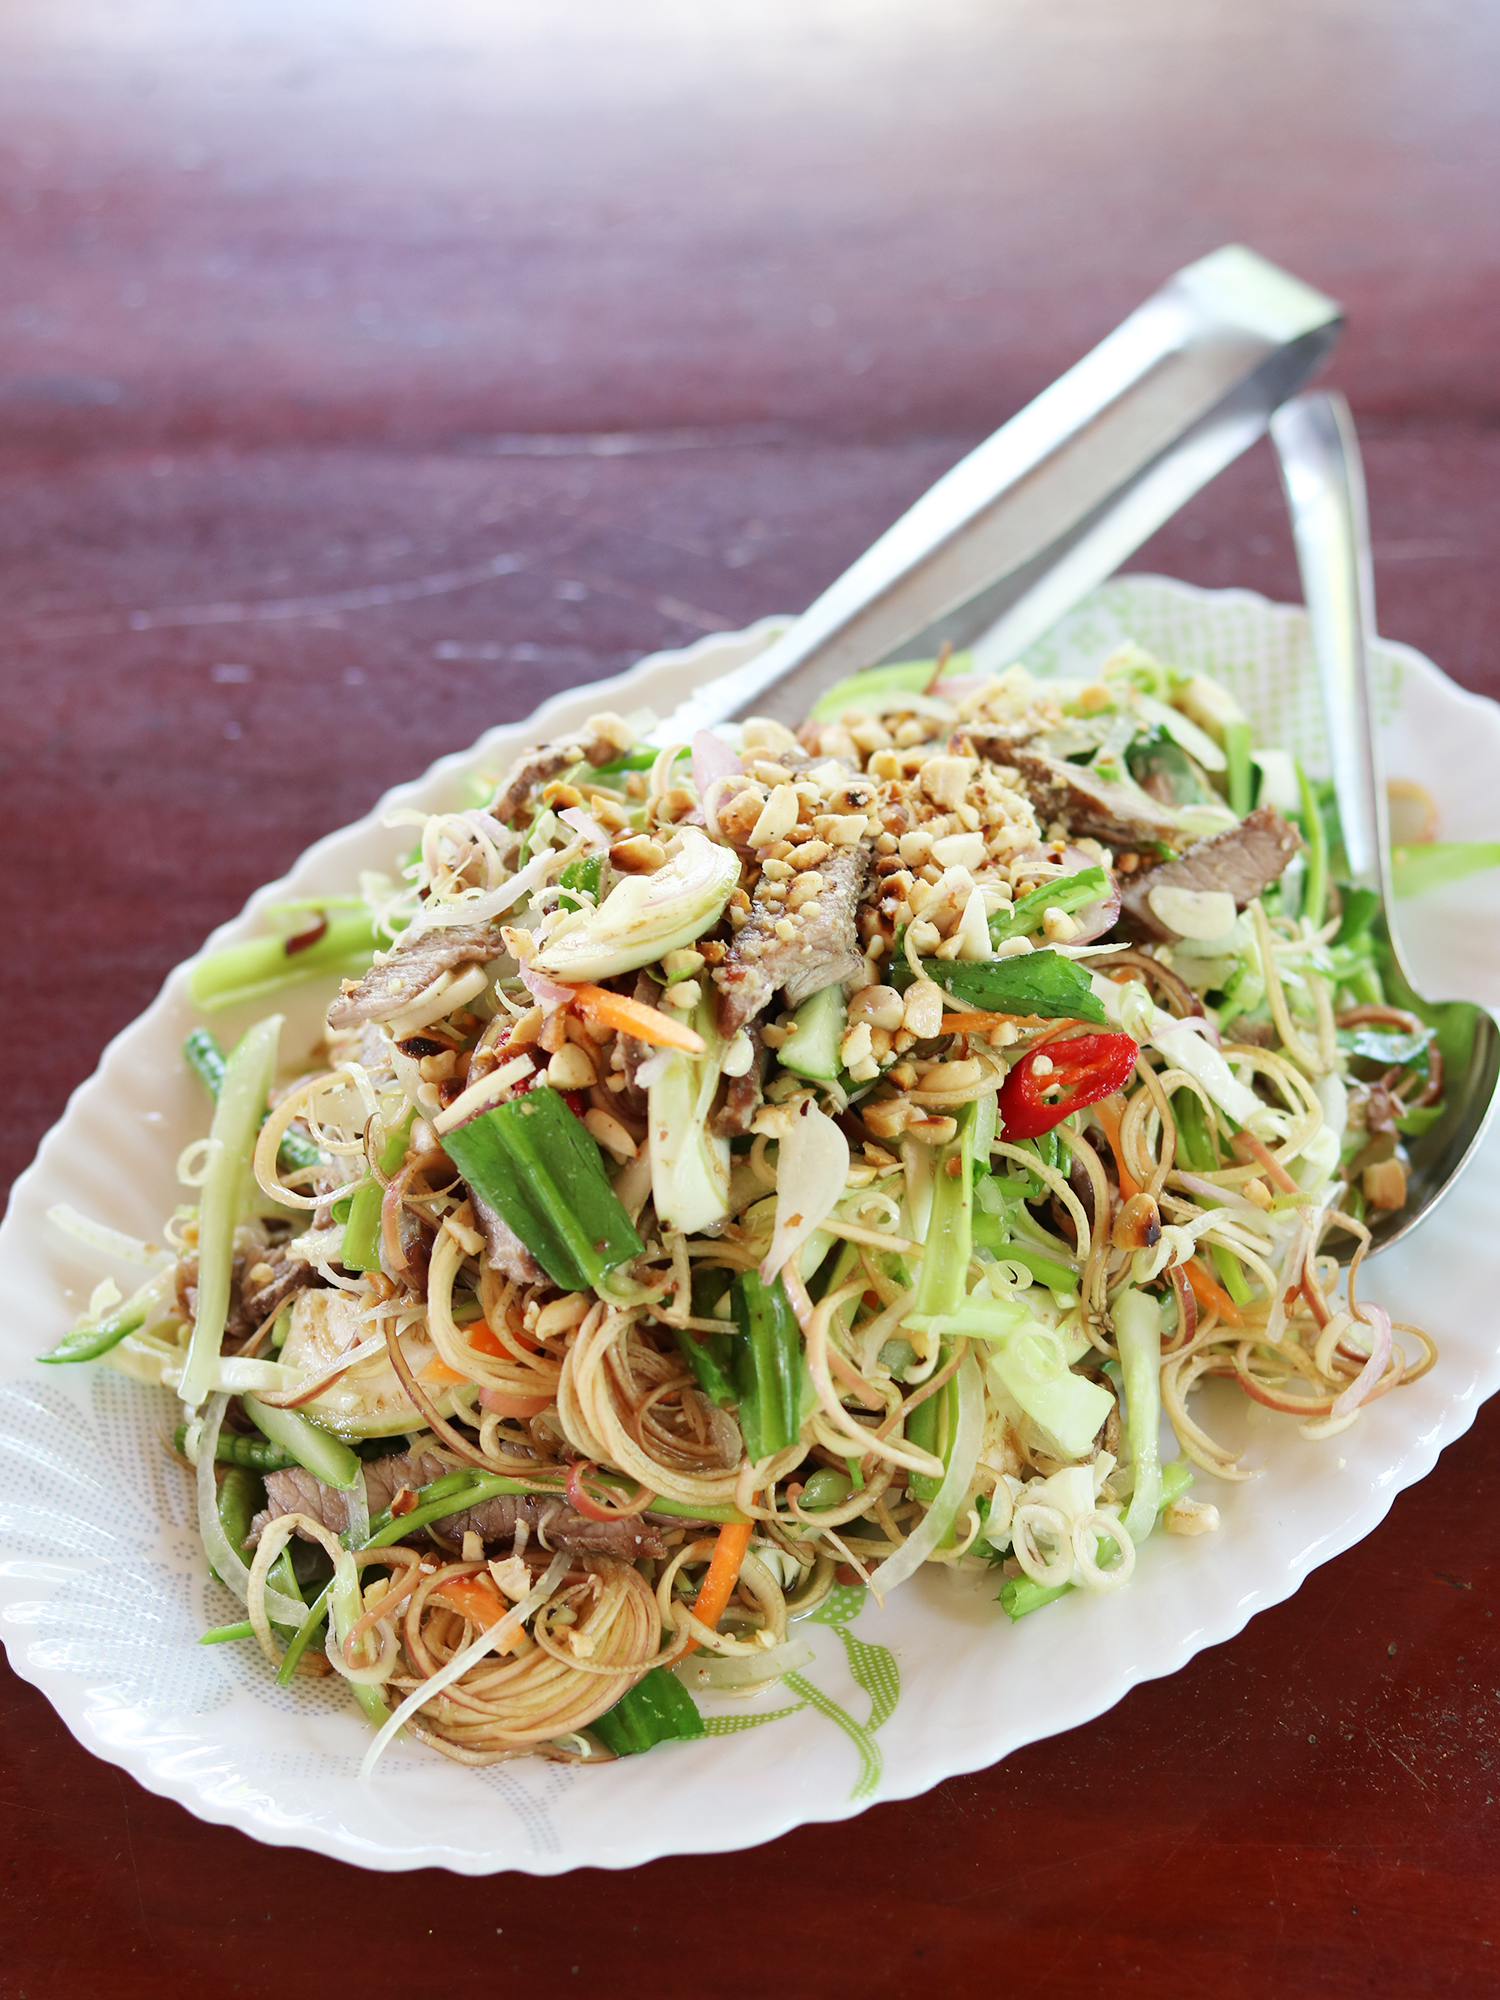 Recipe: Cambodian Beef Salad with Banana Flower